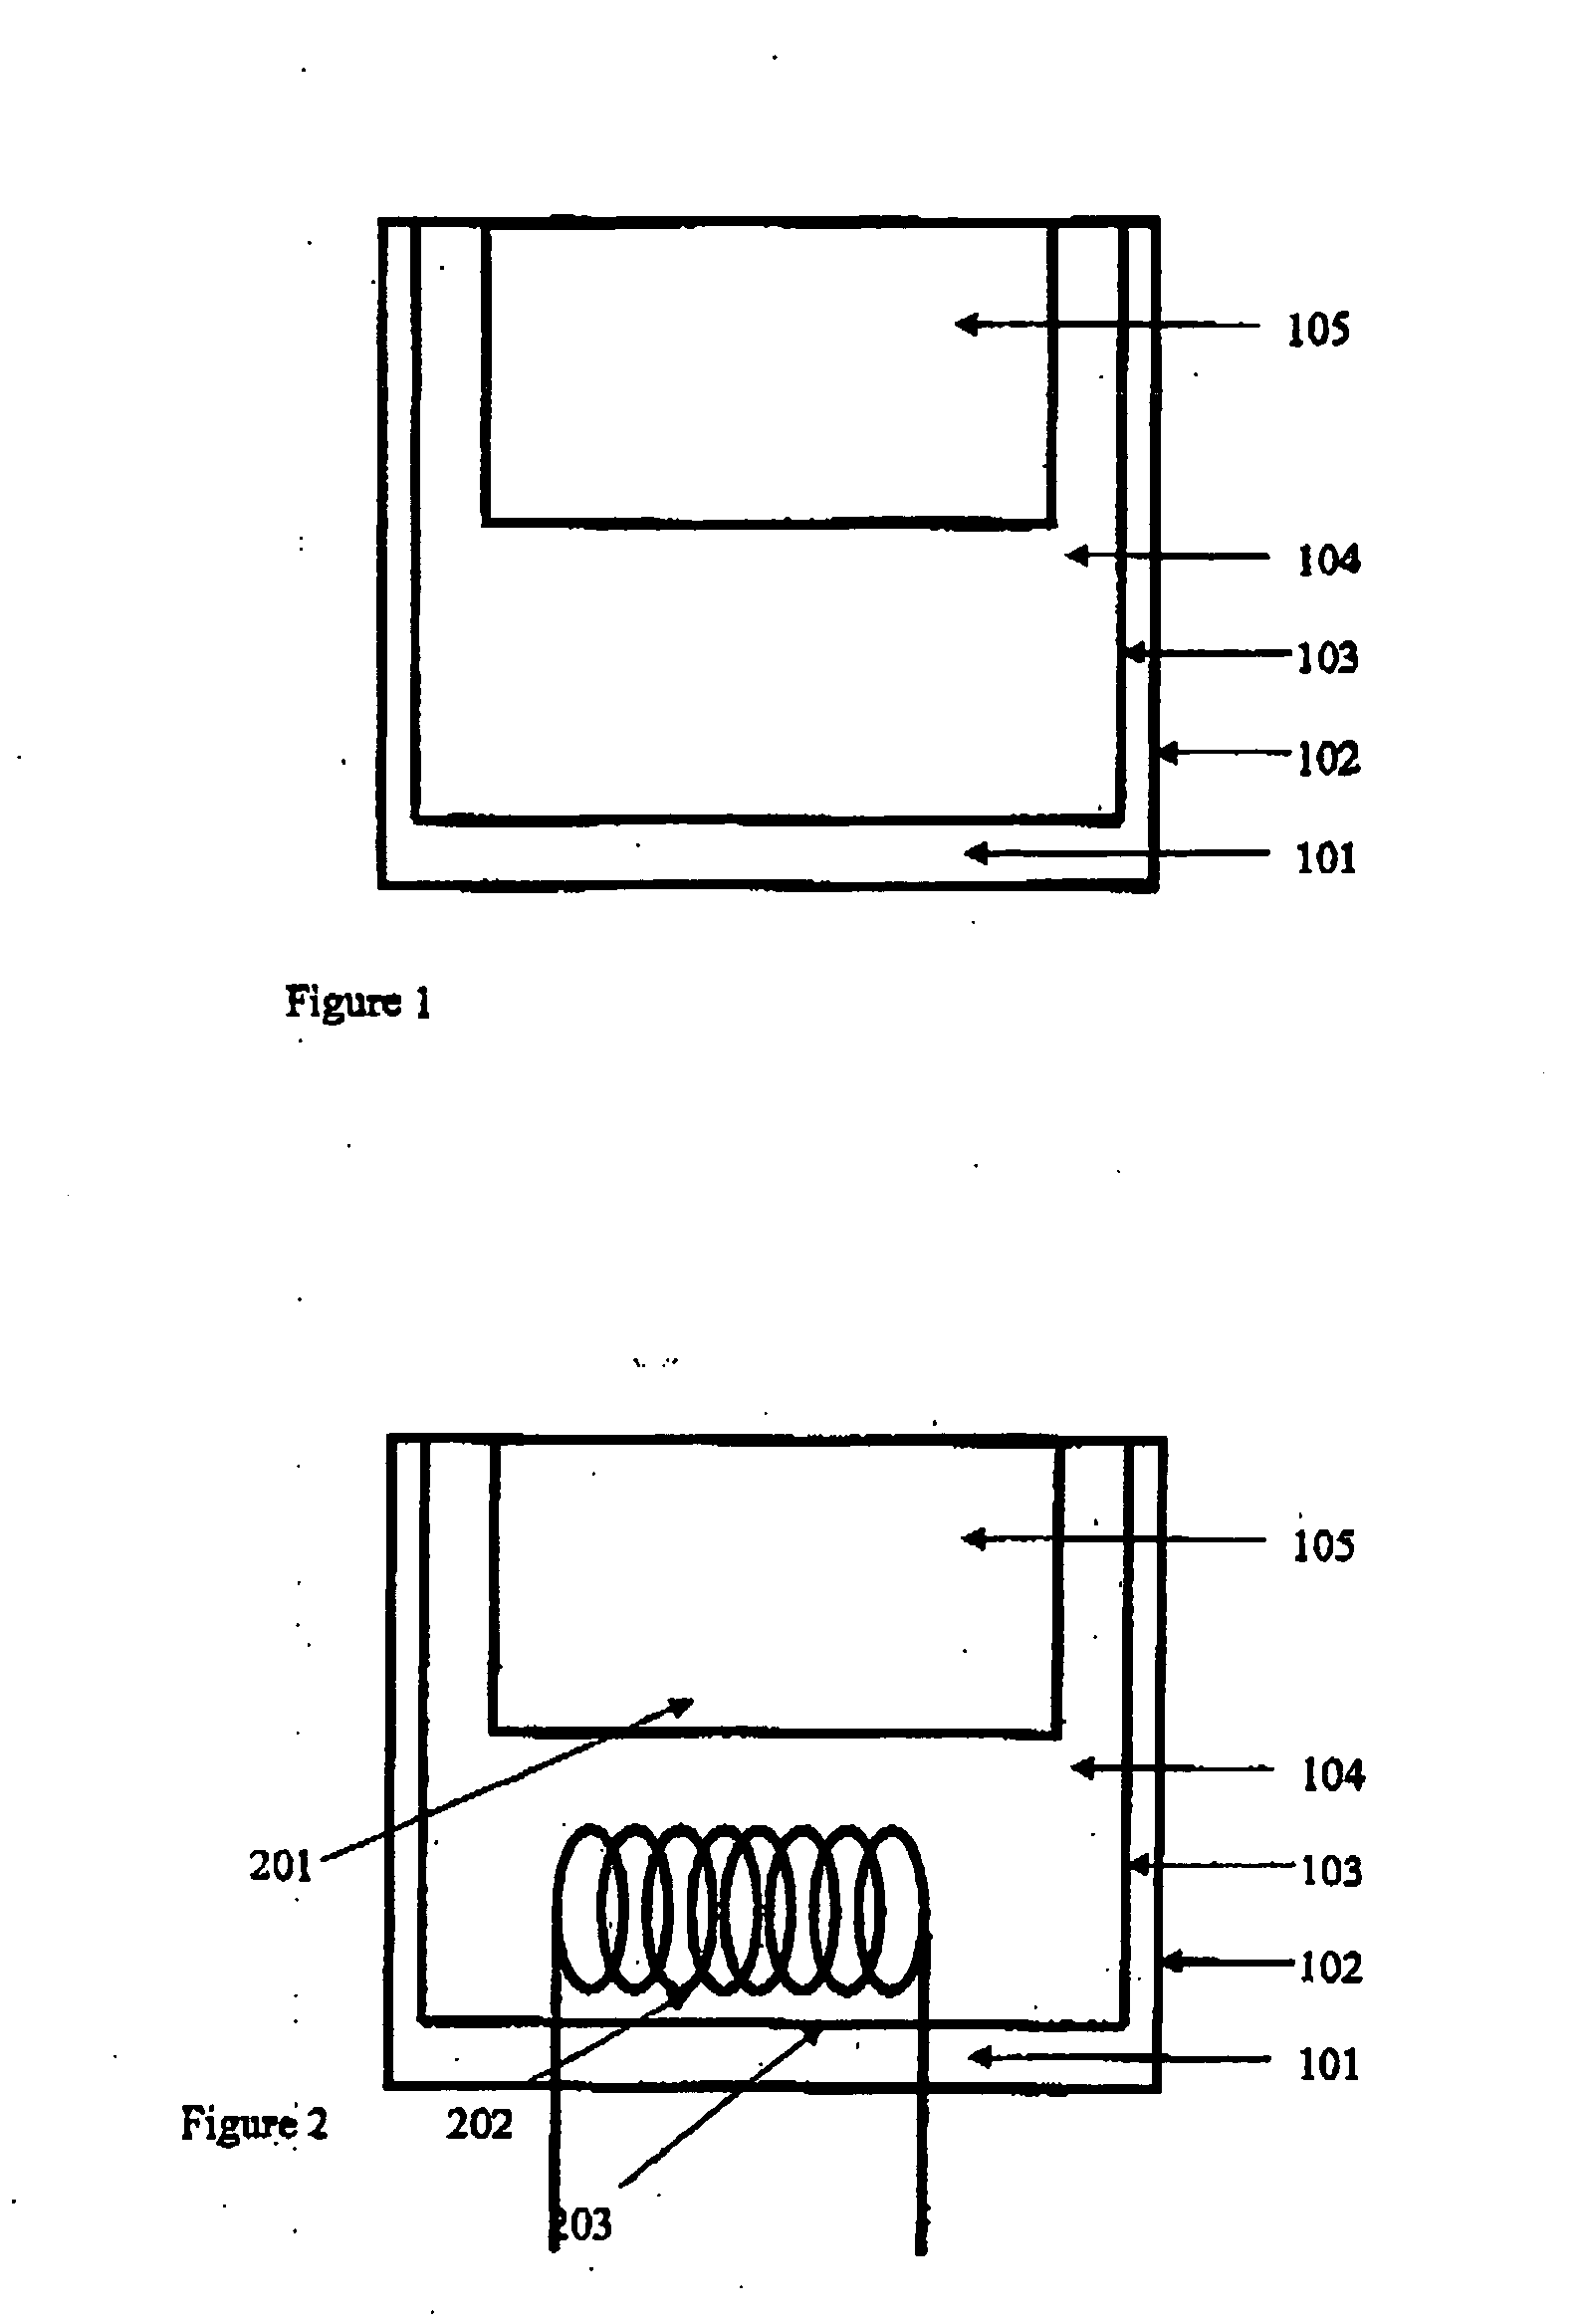 Heating recycling system for regenerating the absorptive materials